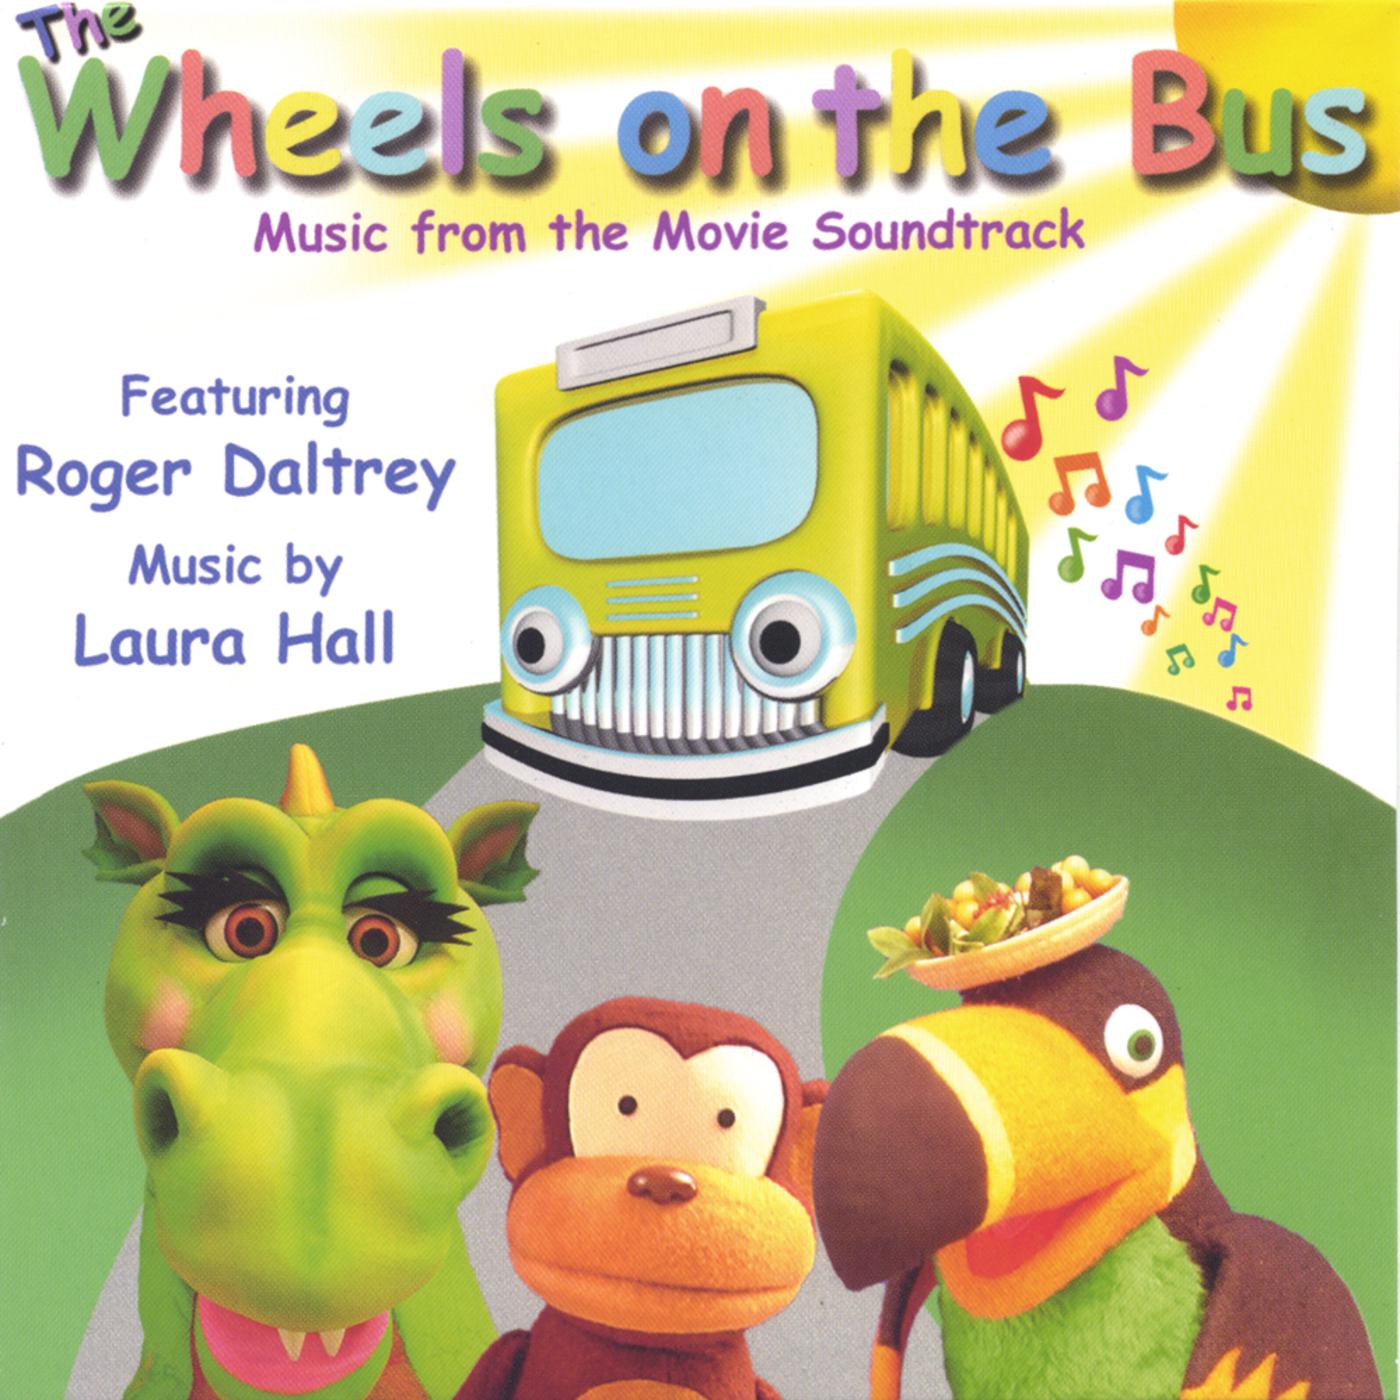 Roger Daltrey - The Mouse on the Bus